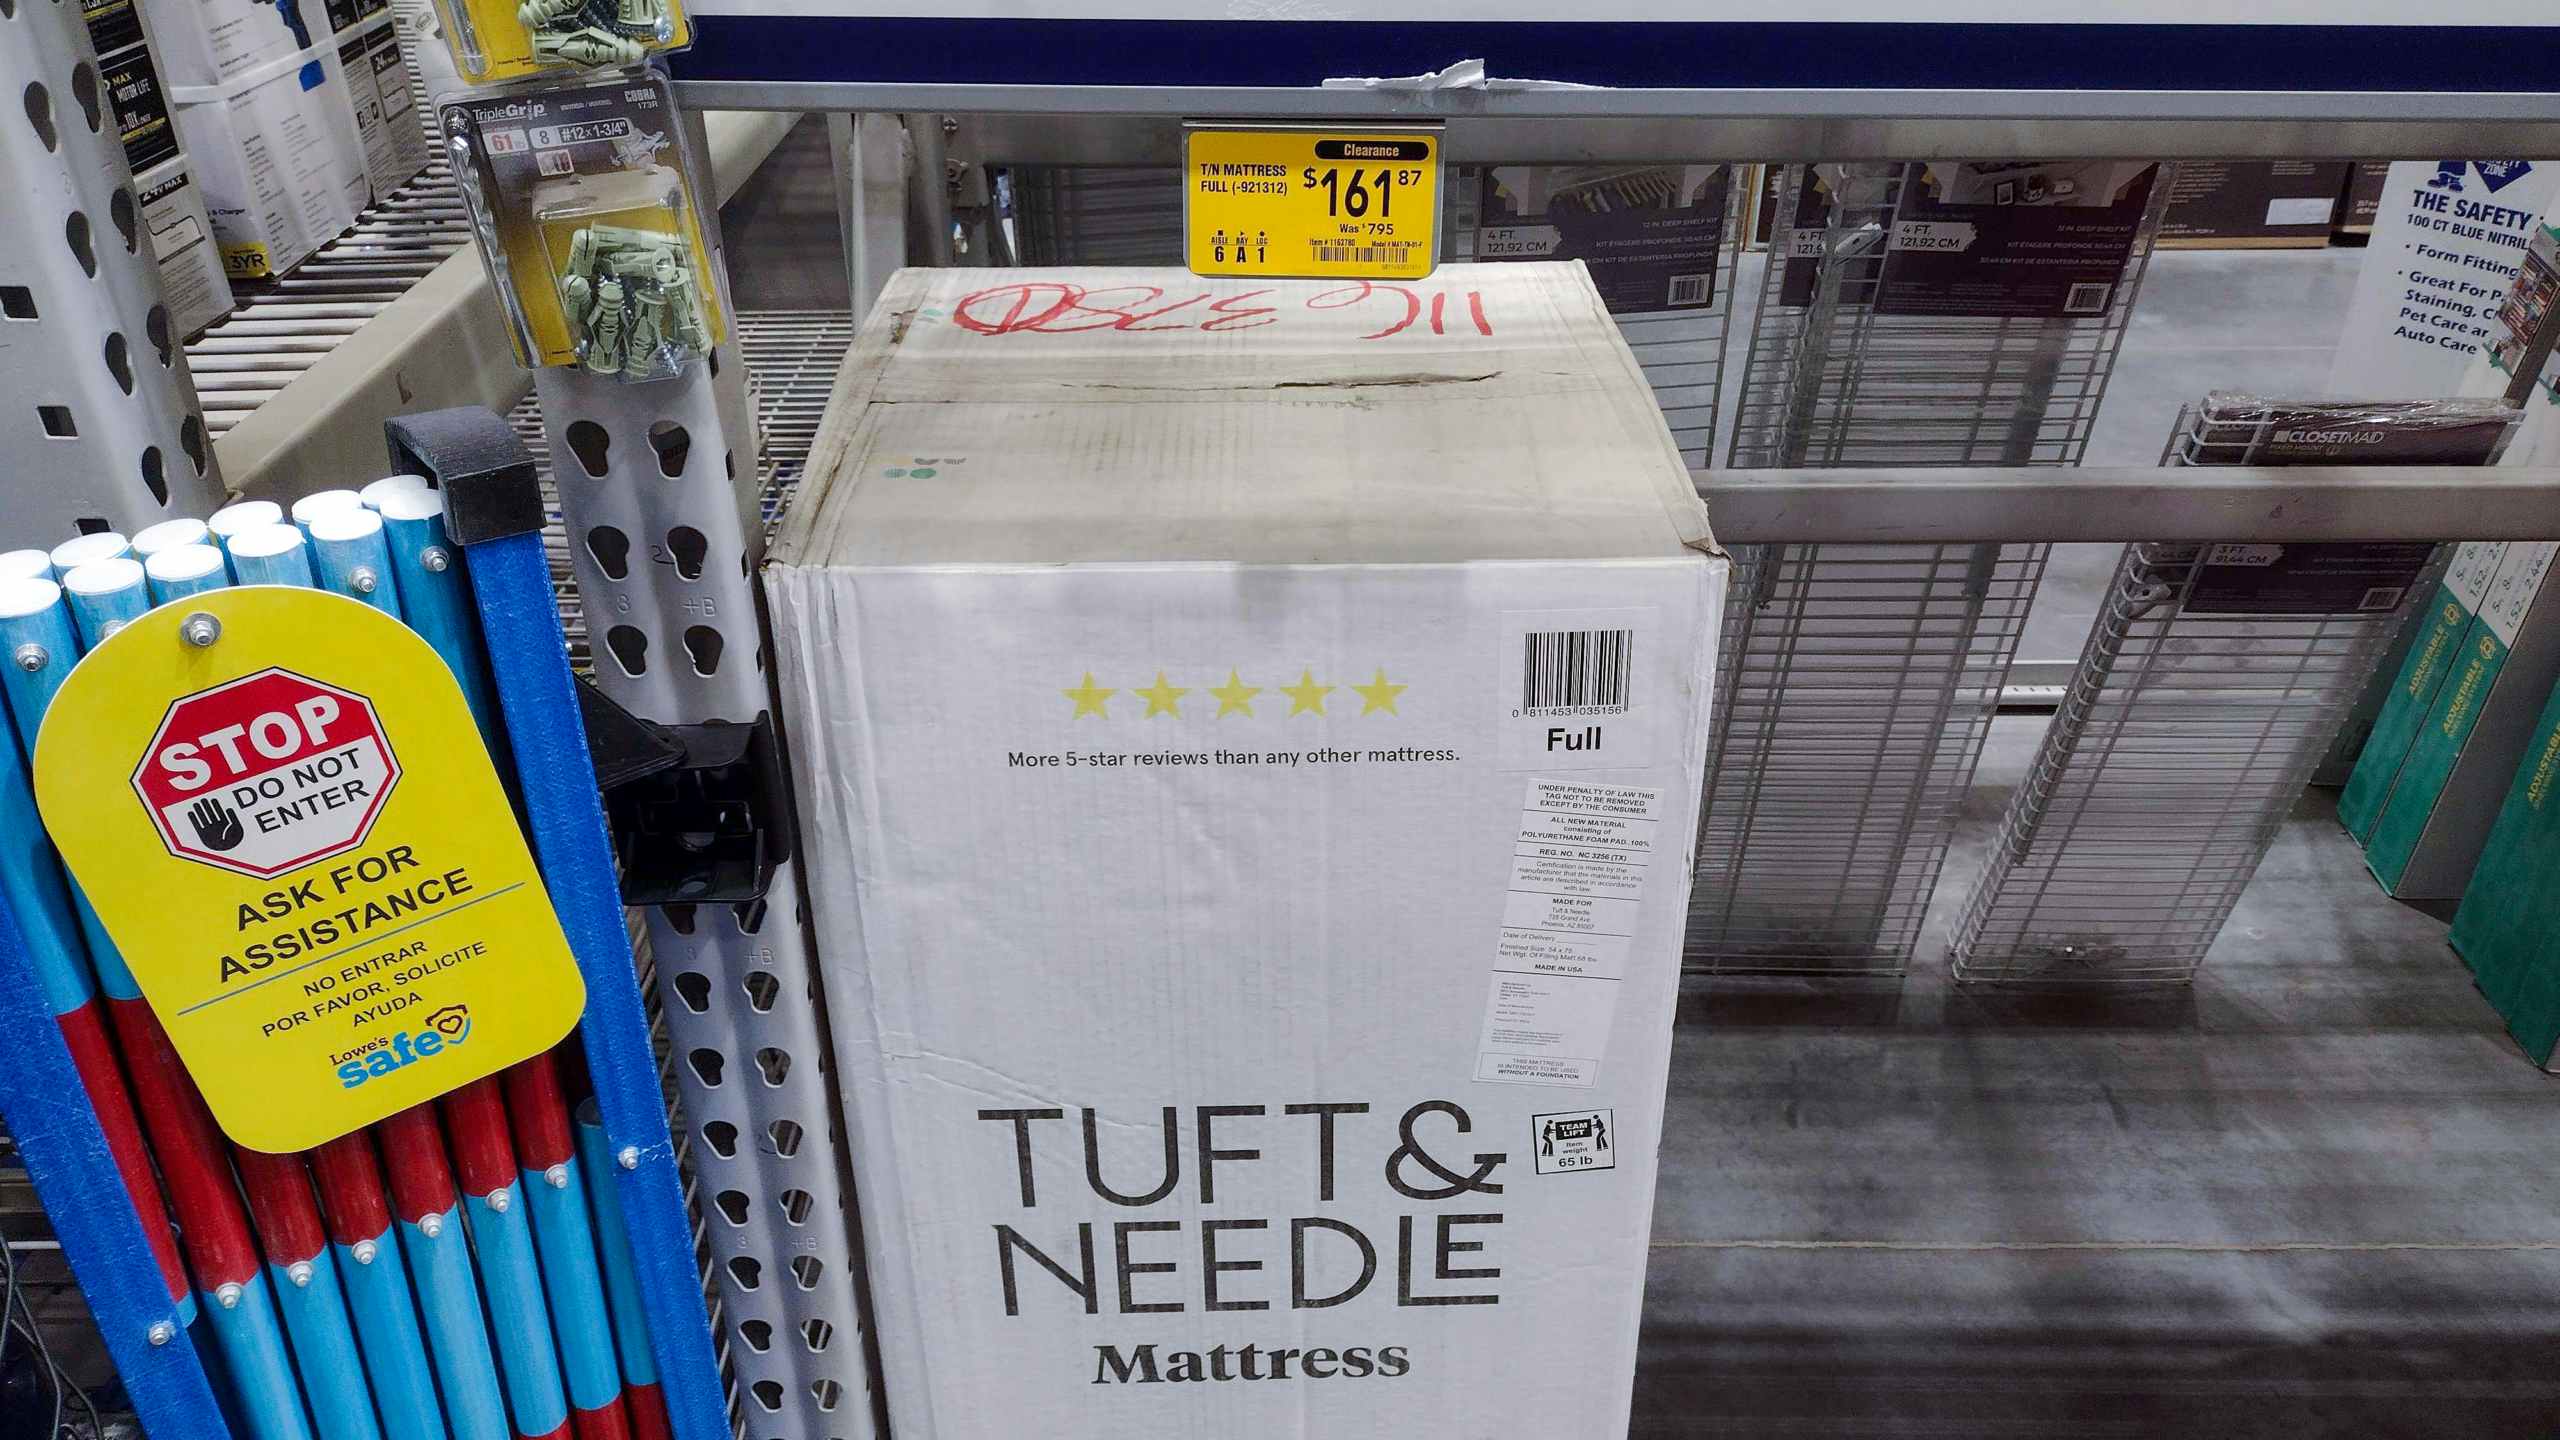 lowes year end clearance tuft and needle full mattress on display